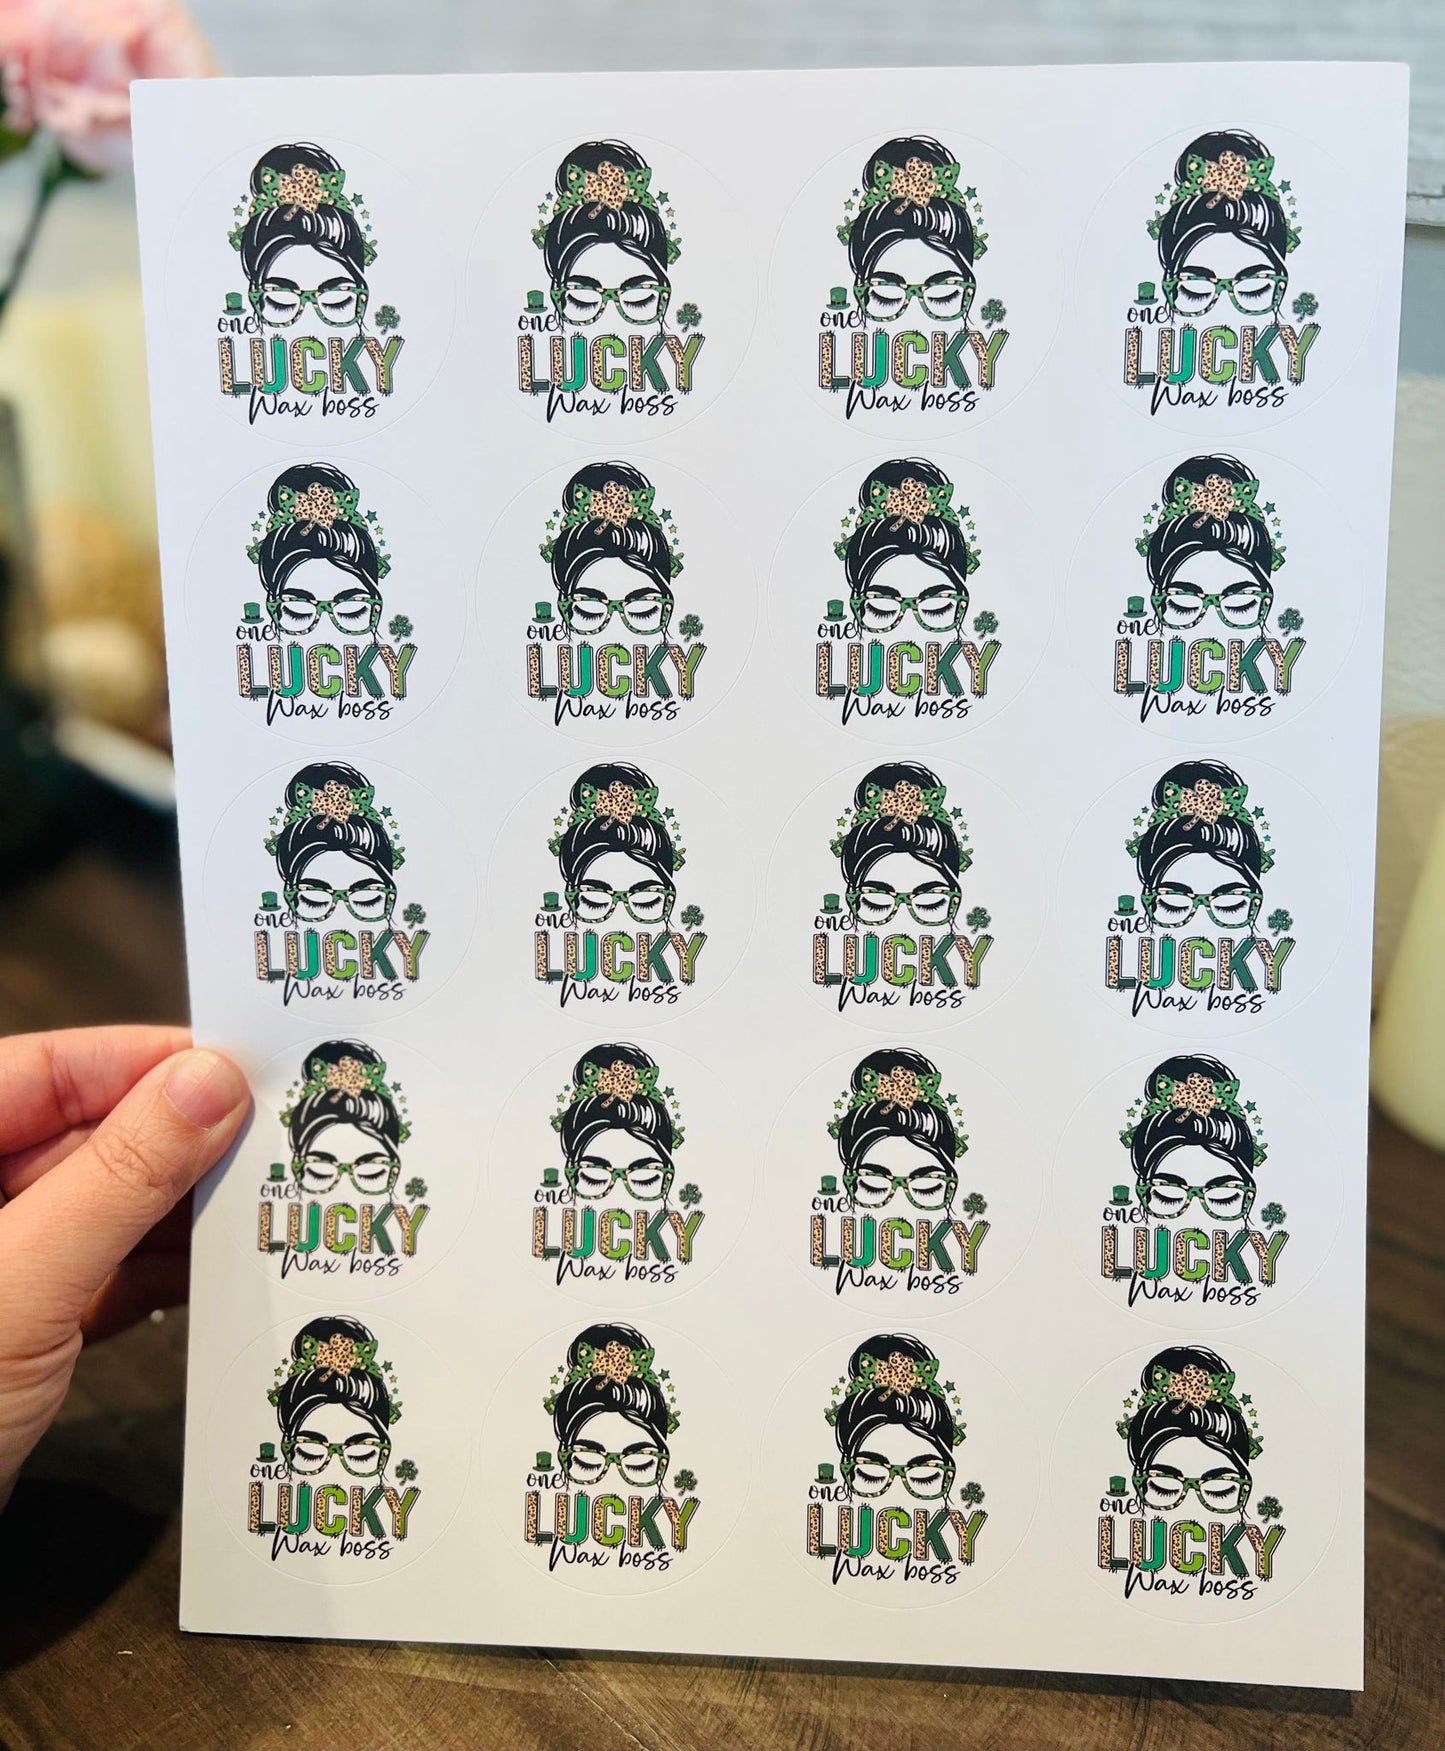 Wax Boss Stickers - Individually OR a Bundle!